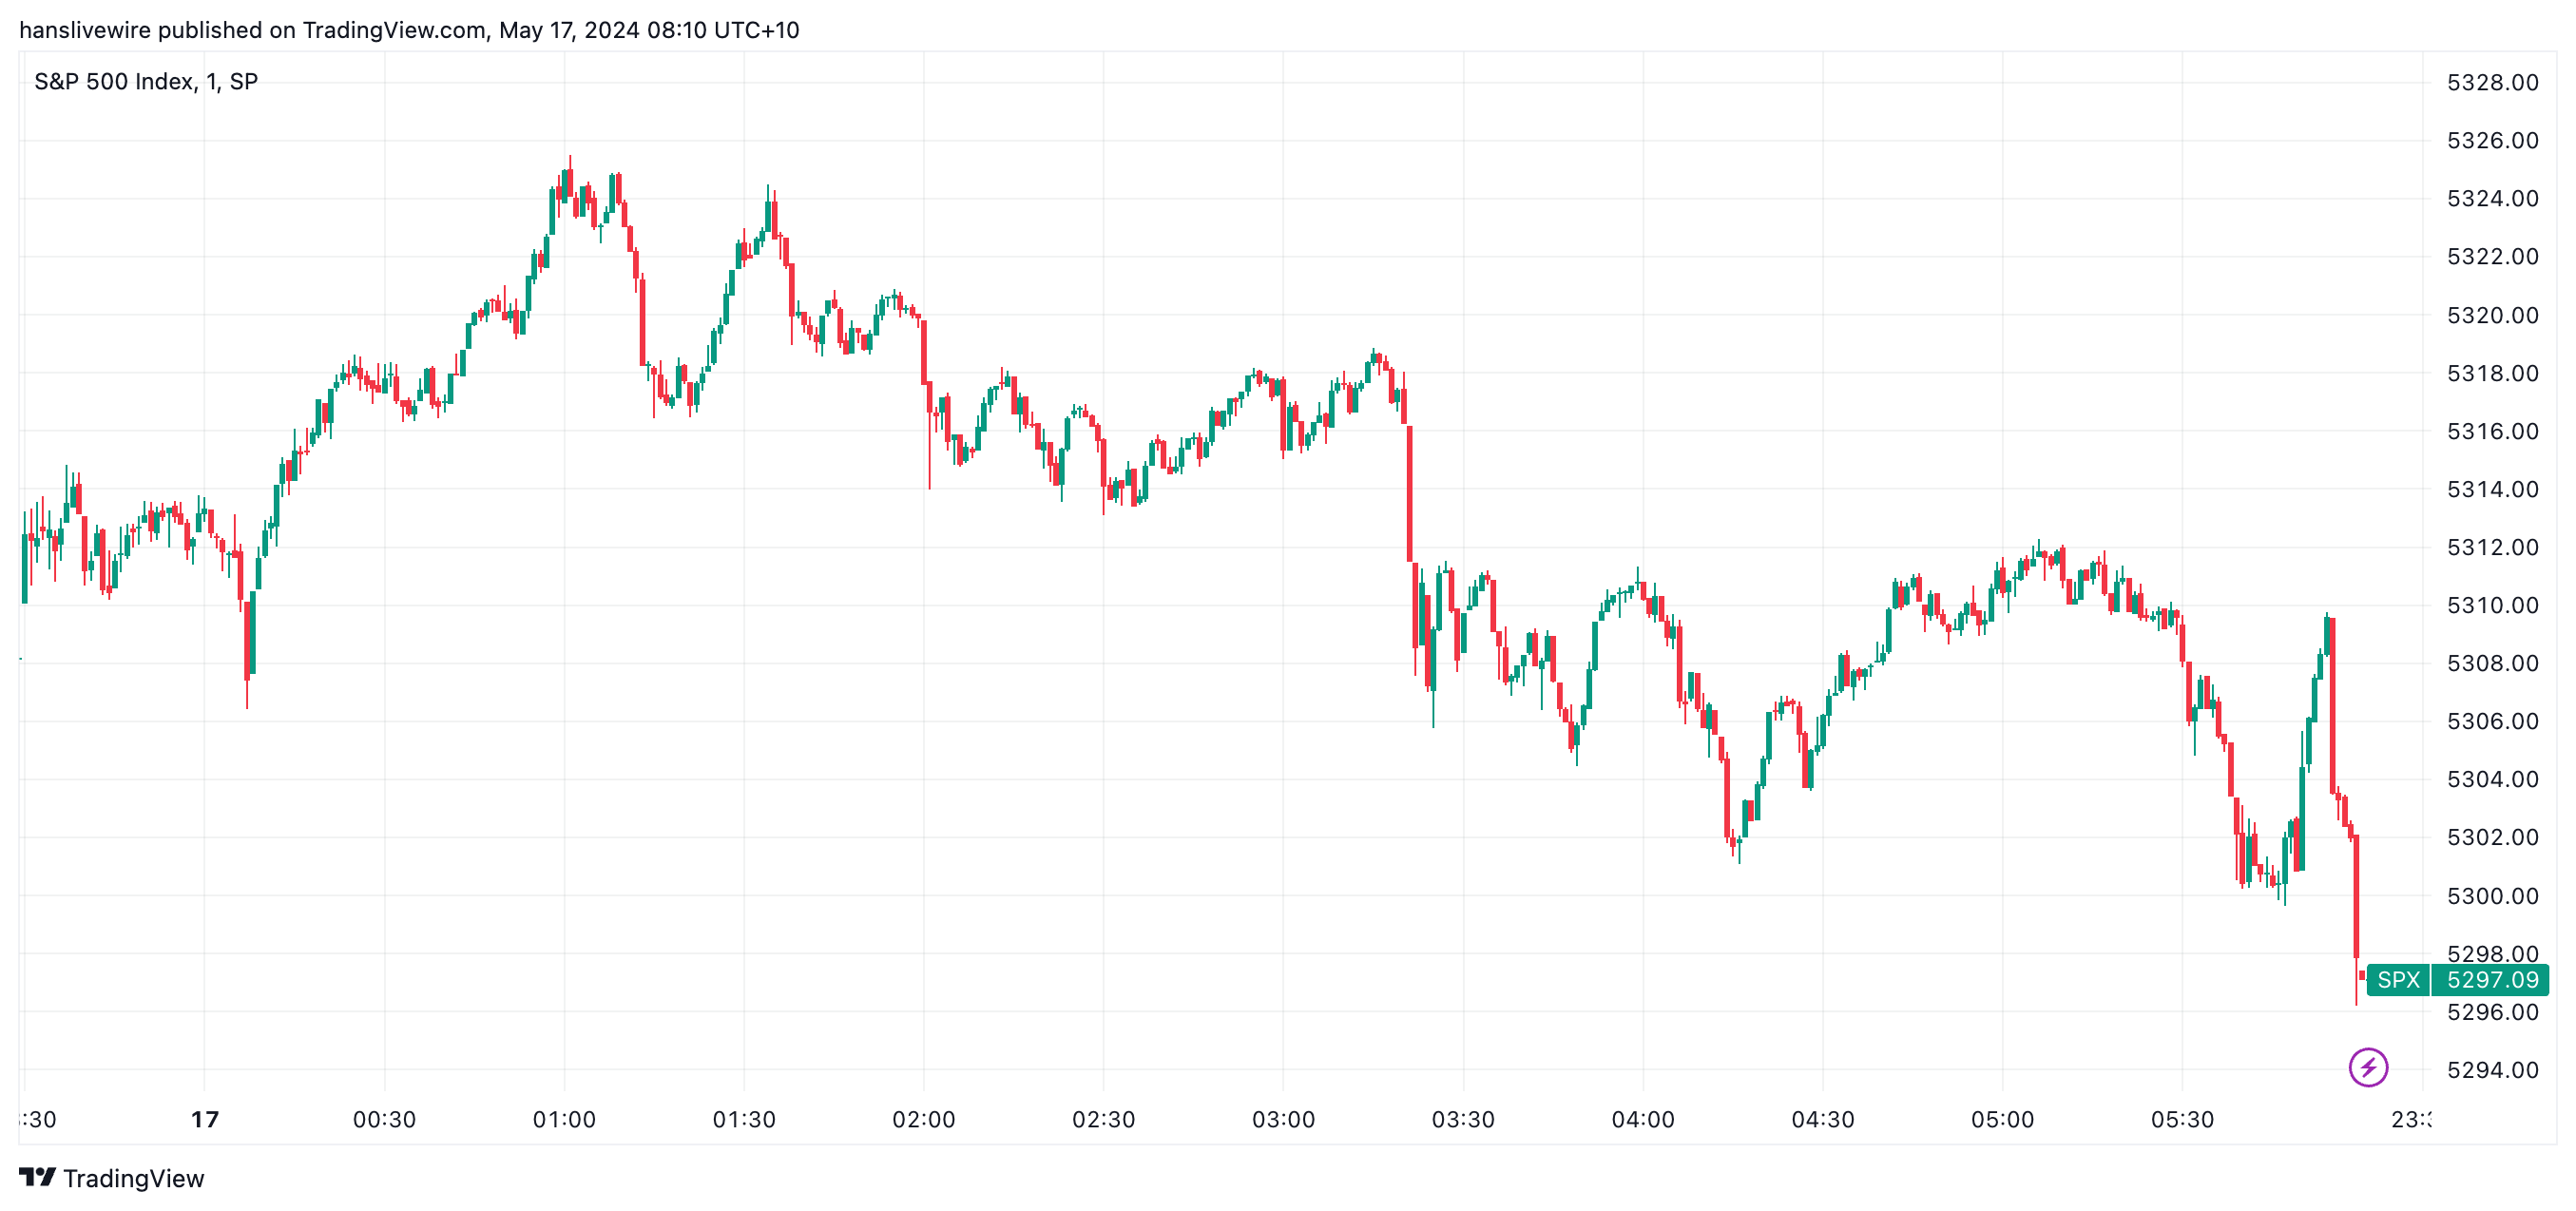 A last minute sell order caused the S&P 500 to close lower. (Source: TradingView)